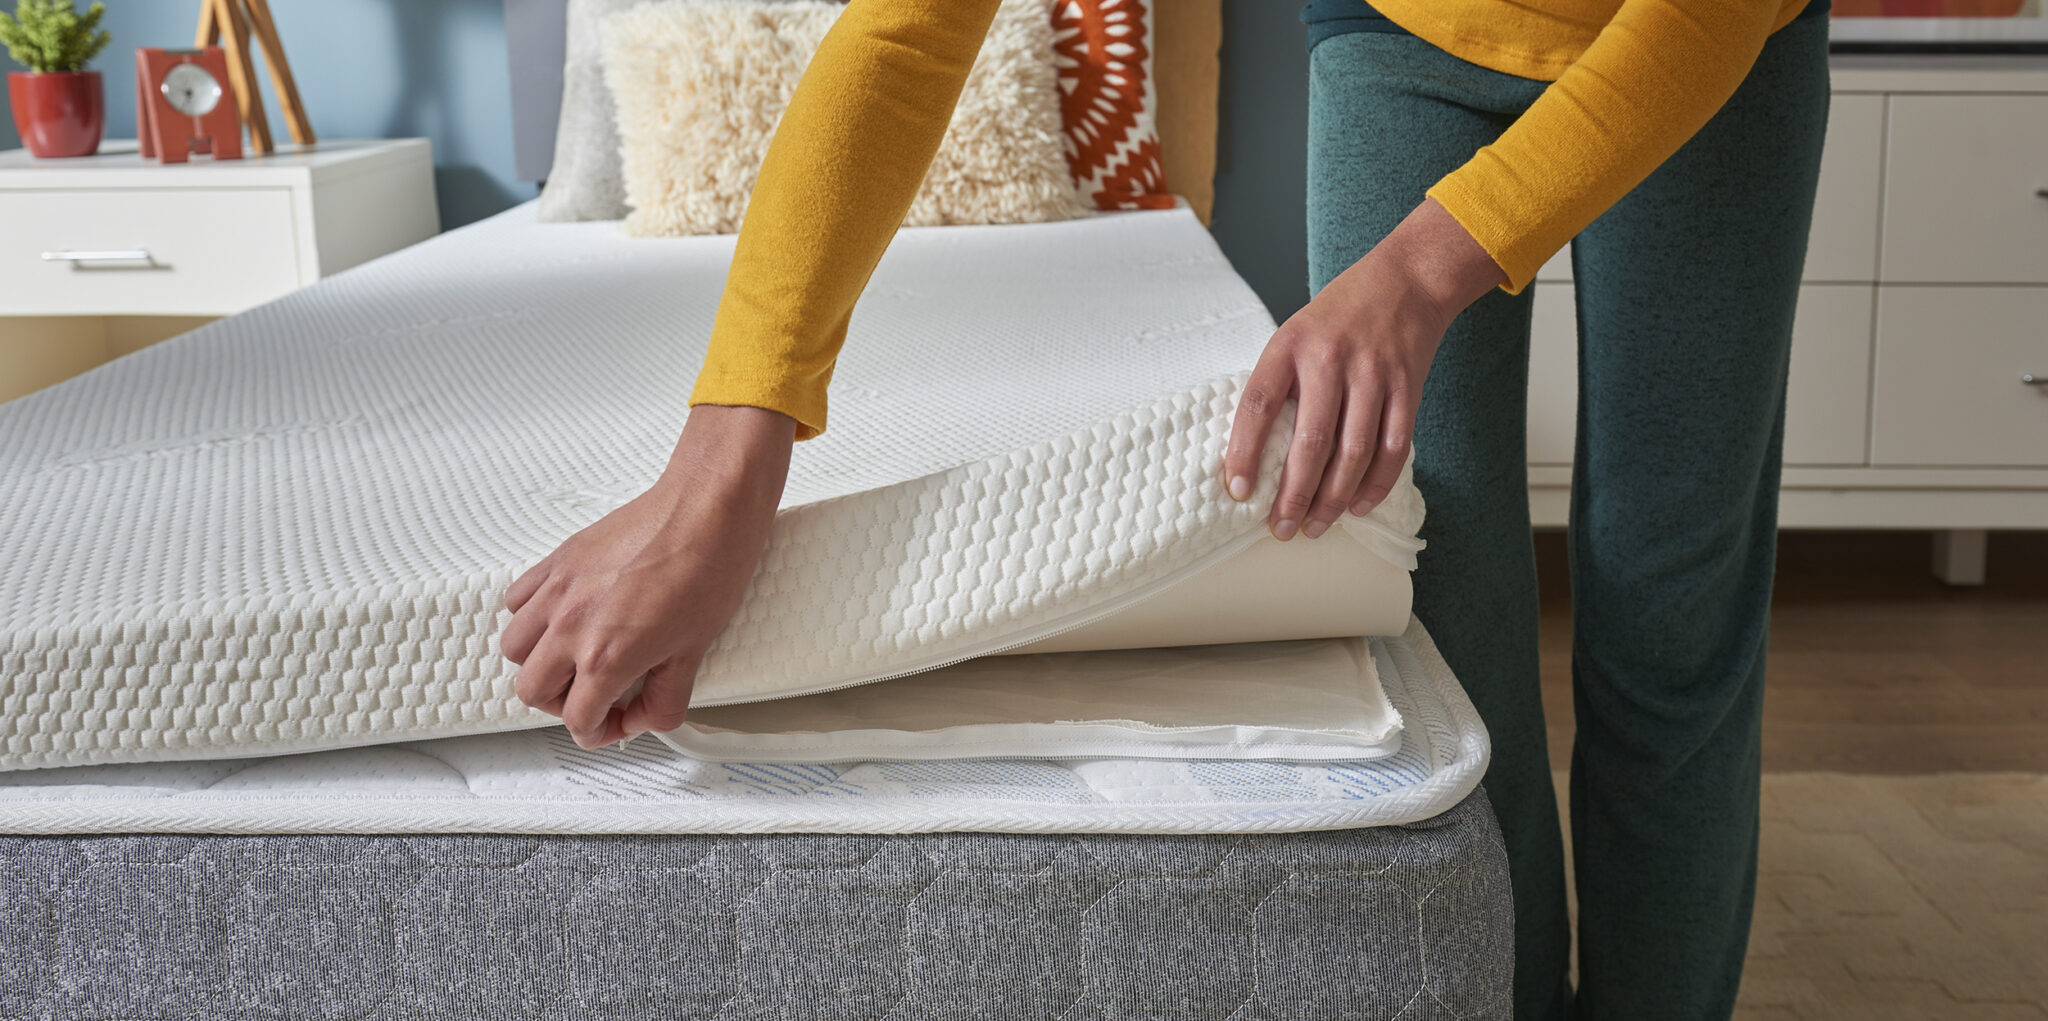 does mattress topper make a difference